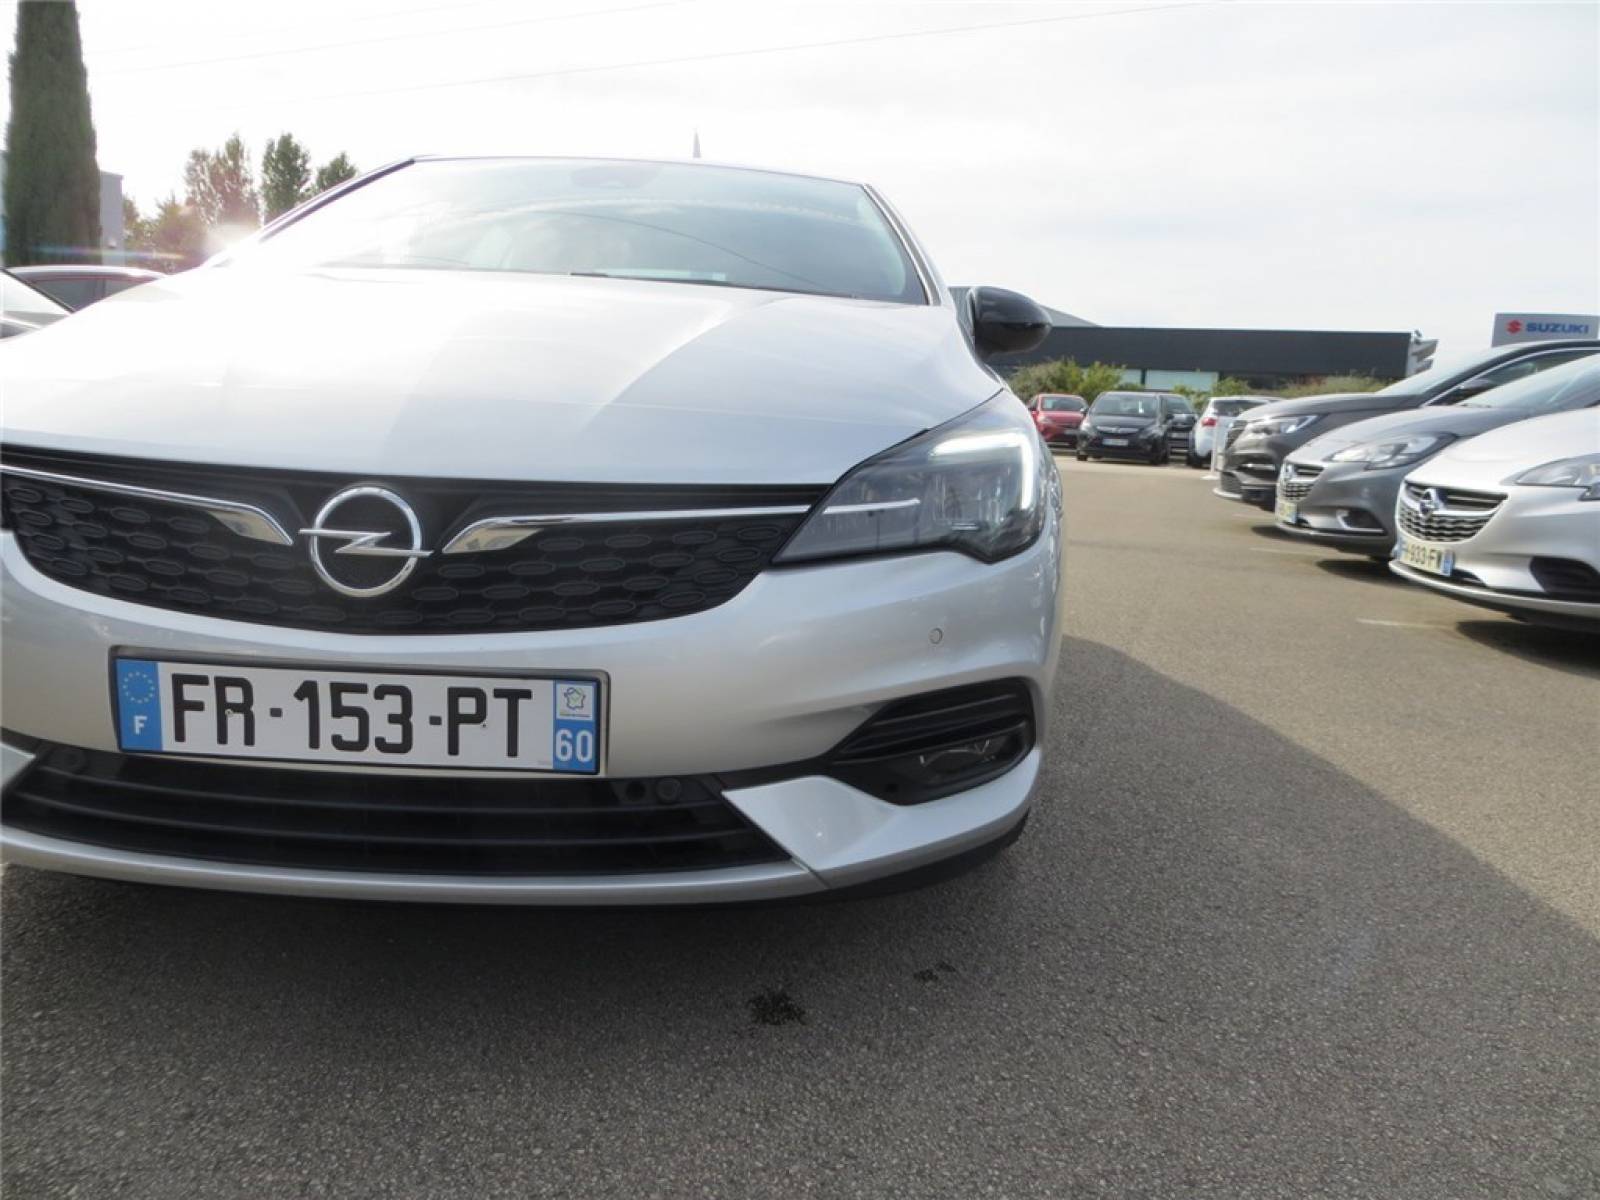 OPEL Astra 1.2 Turbo 130 ch BVM6 - véhicule d'occasion - Groupe Guillet - Opel Magicauto - Chalon-sur-Saône - 71380 - Saint-Marcel - 3